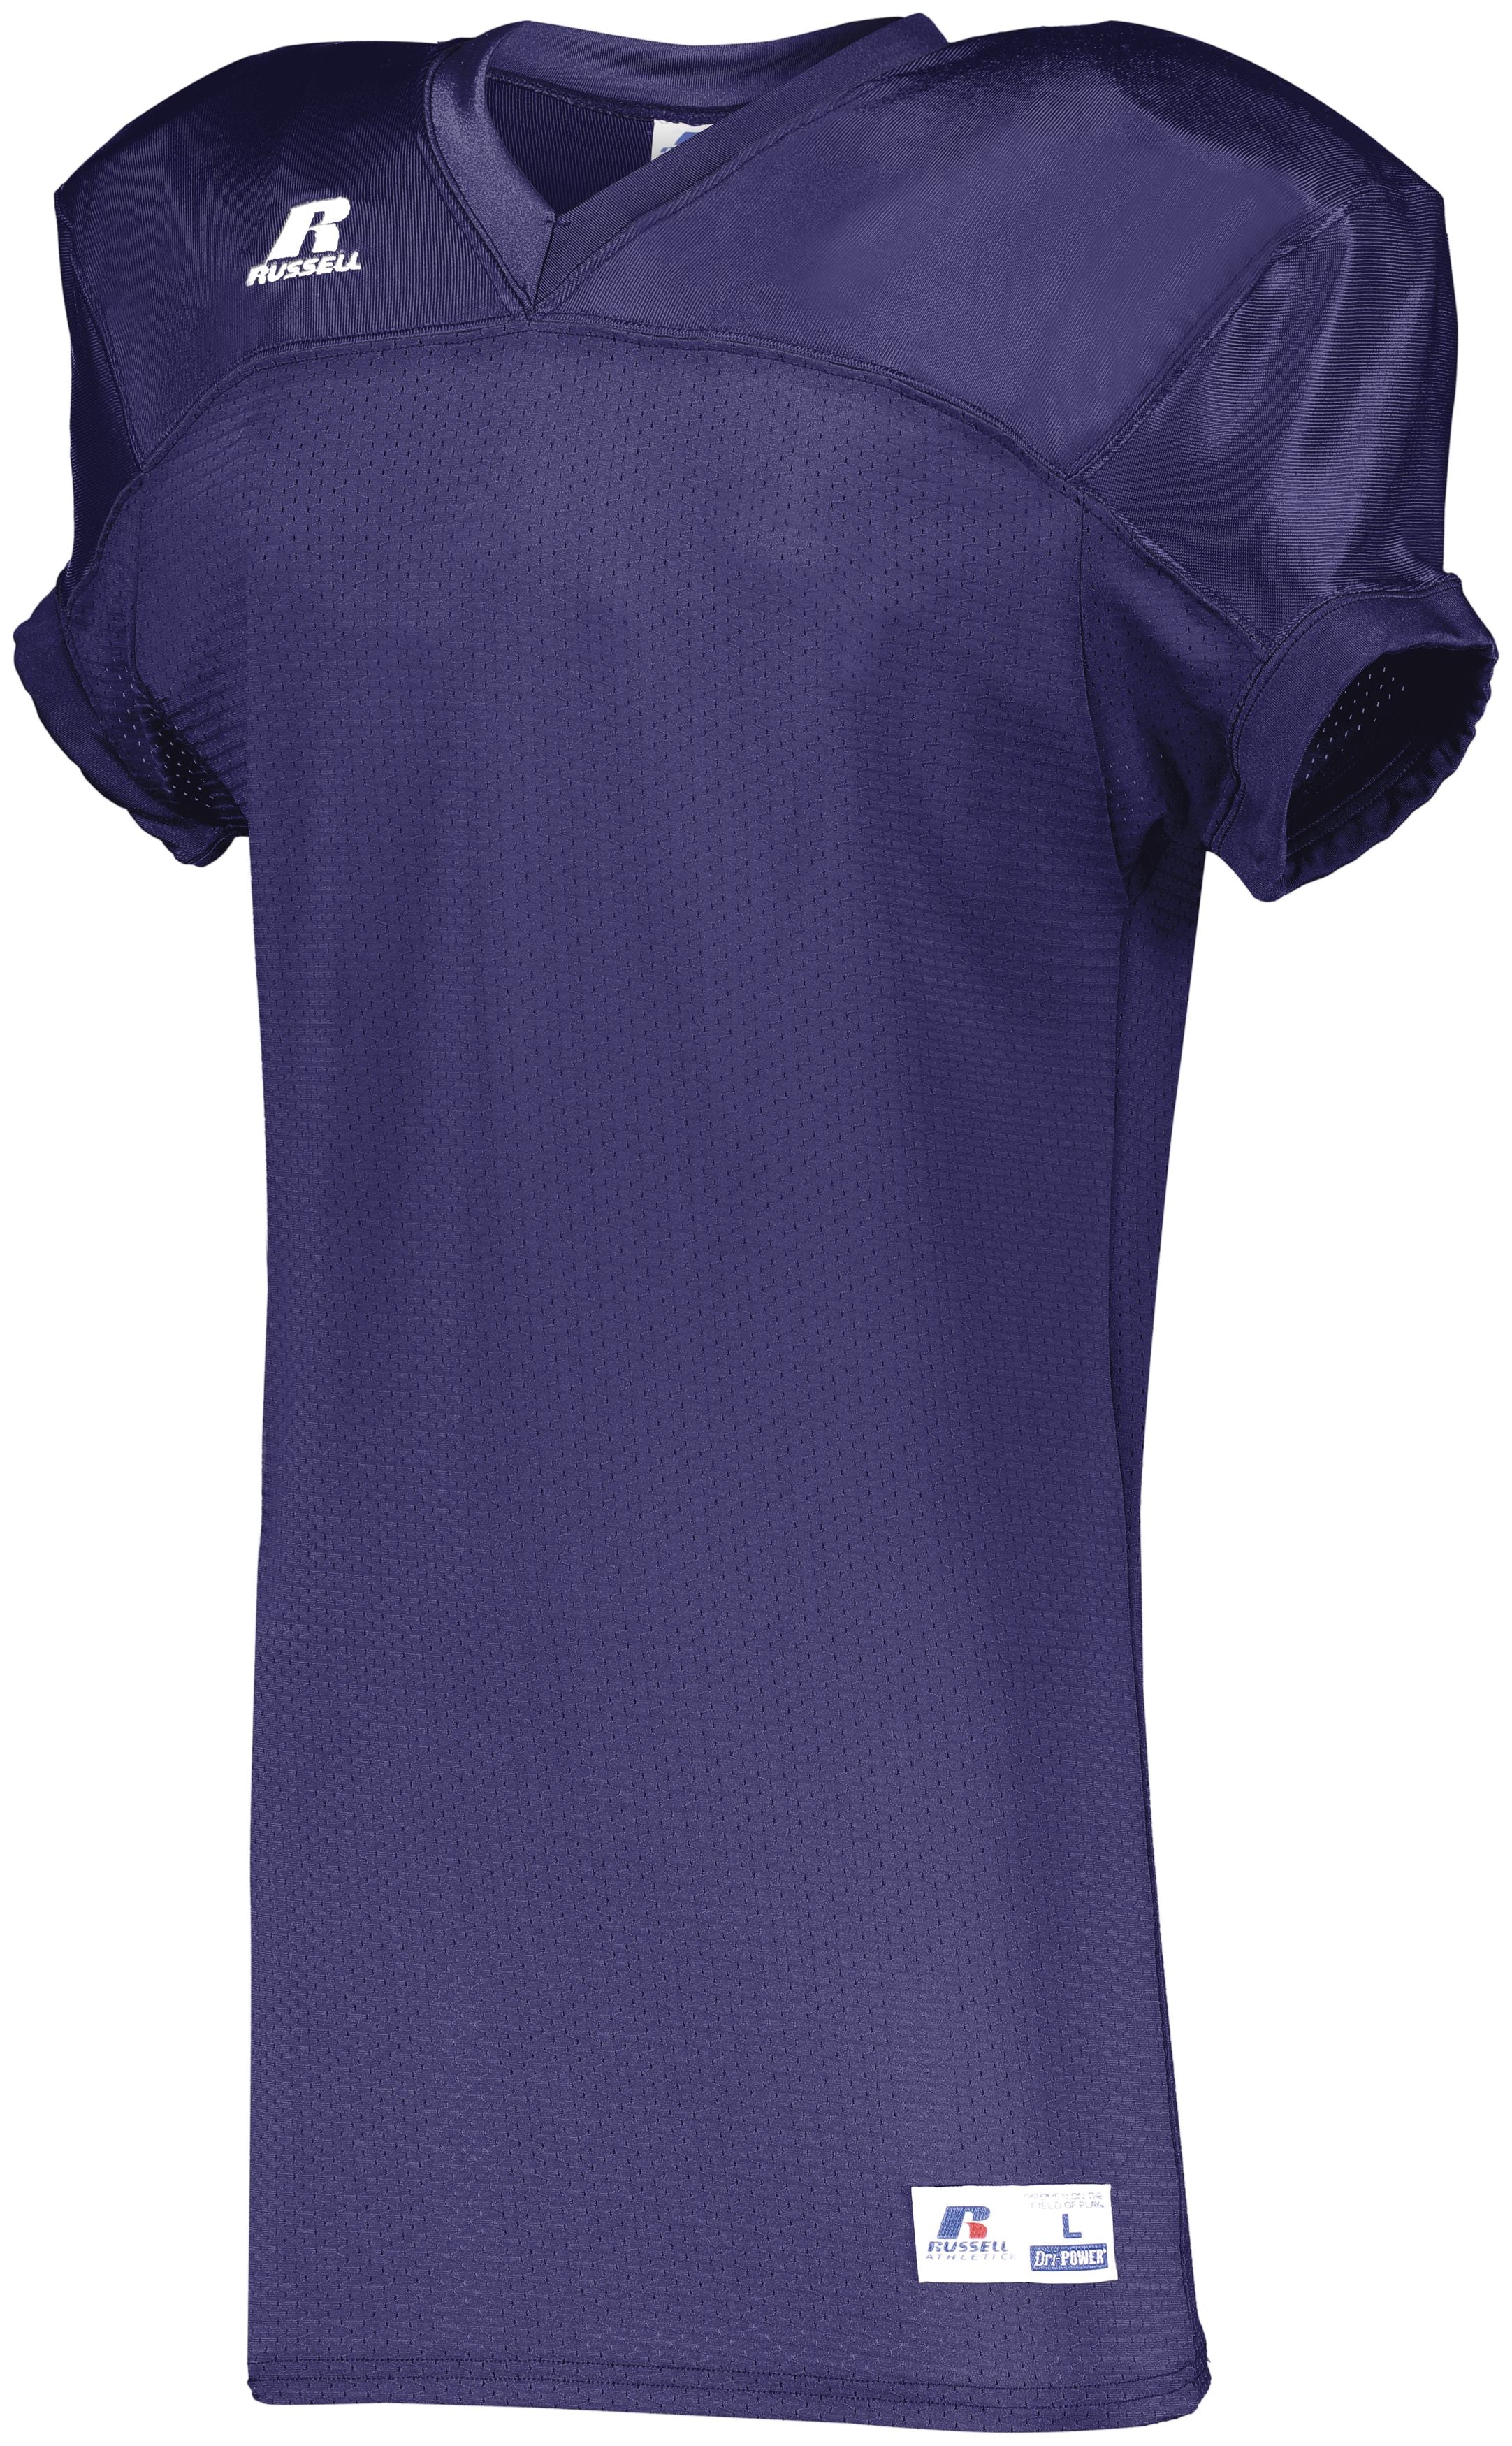 Russell Athletic Stretch Mesh Game Jersey in Purple  -Part of the Adult, Adult-Jersey, Football, Russell-Athletic-Products, Shirts, All-Sports, All-Sports-1 product lines at KanaleyCreations.com